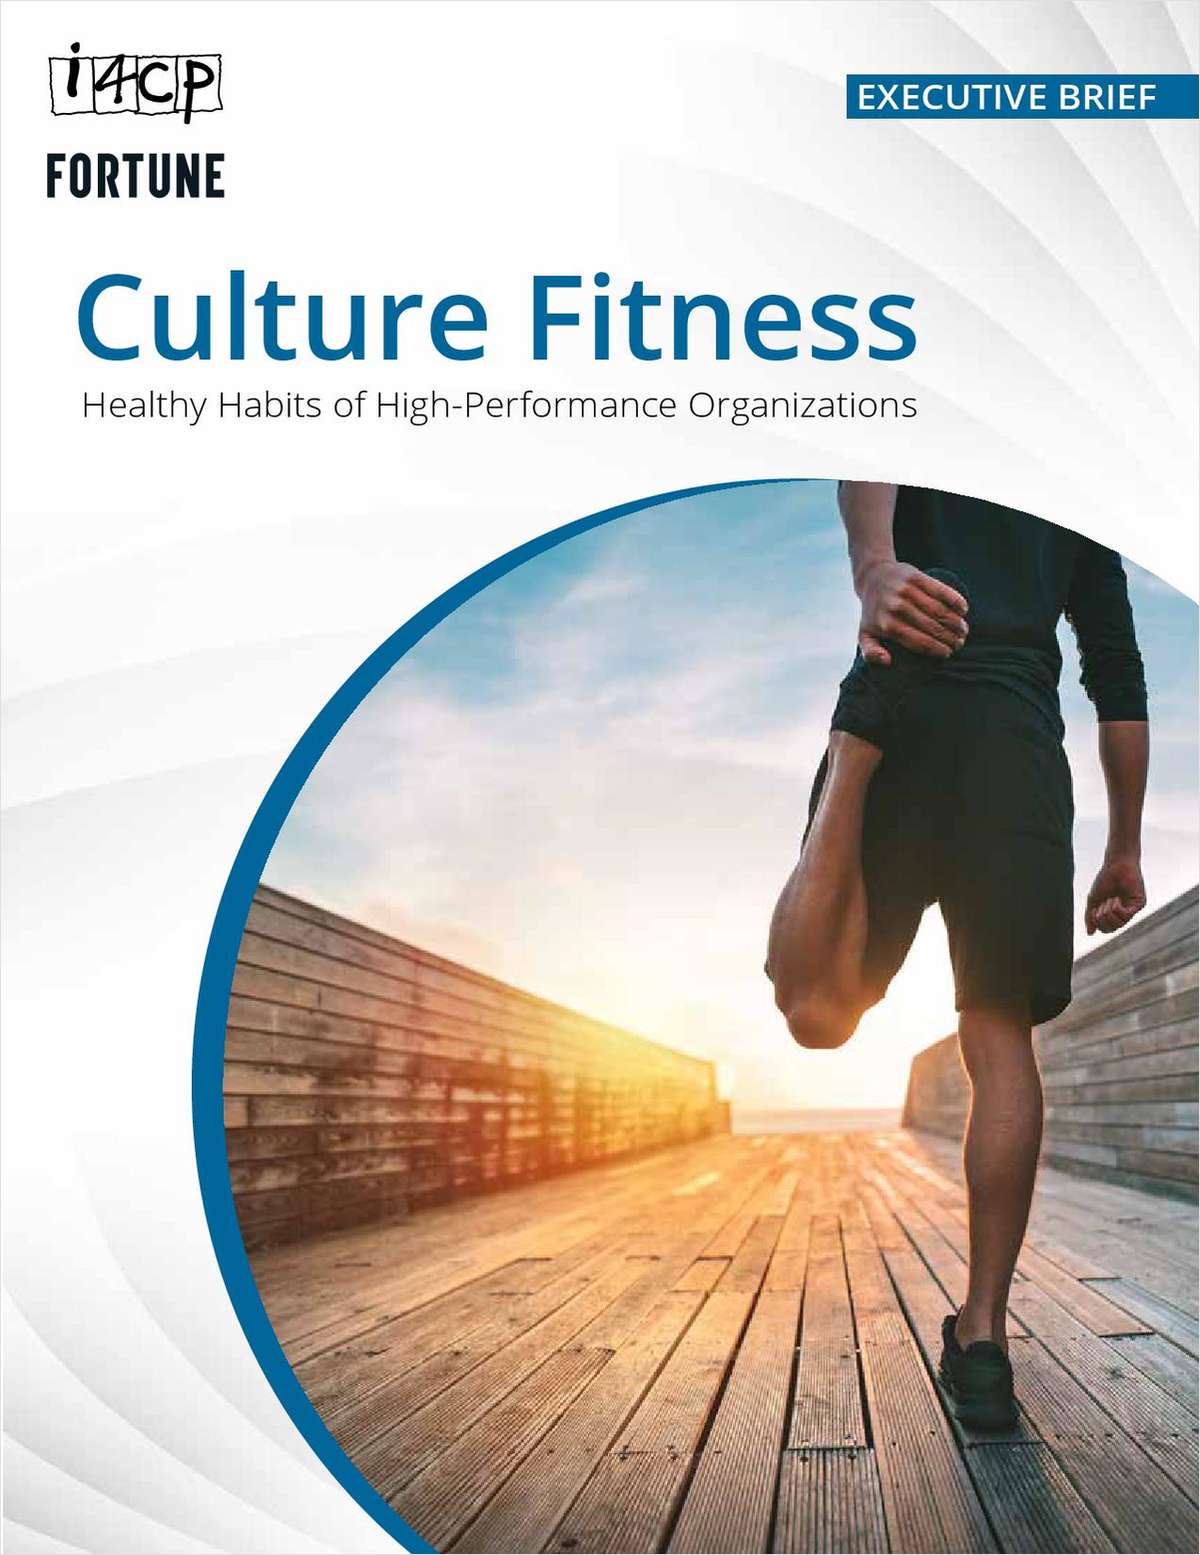 Culture Fitness: Healthy Habits of High-Performance Organizations